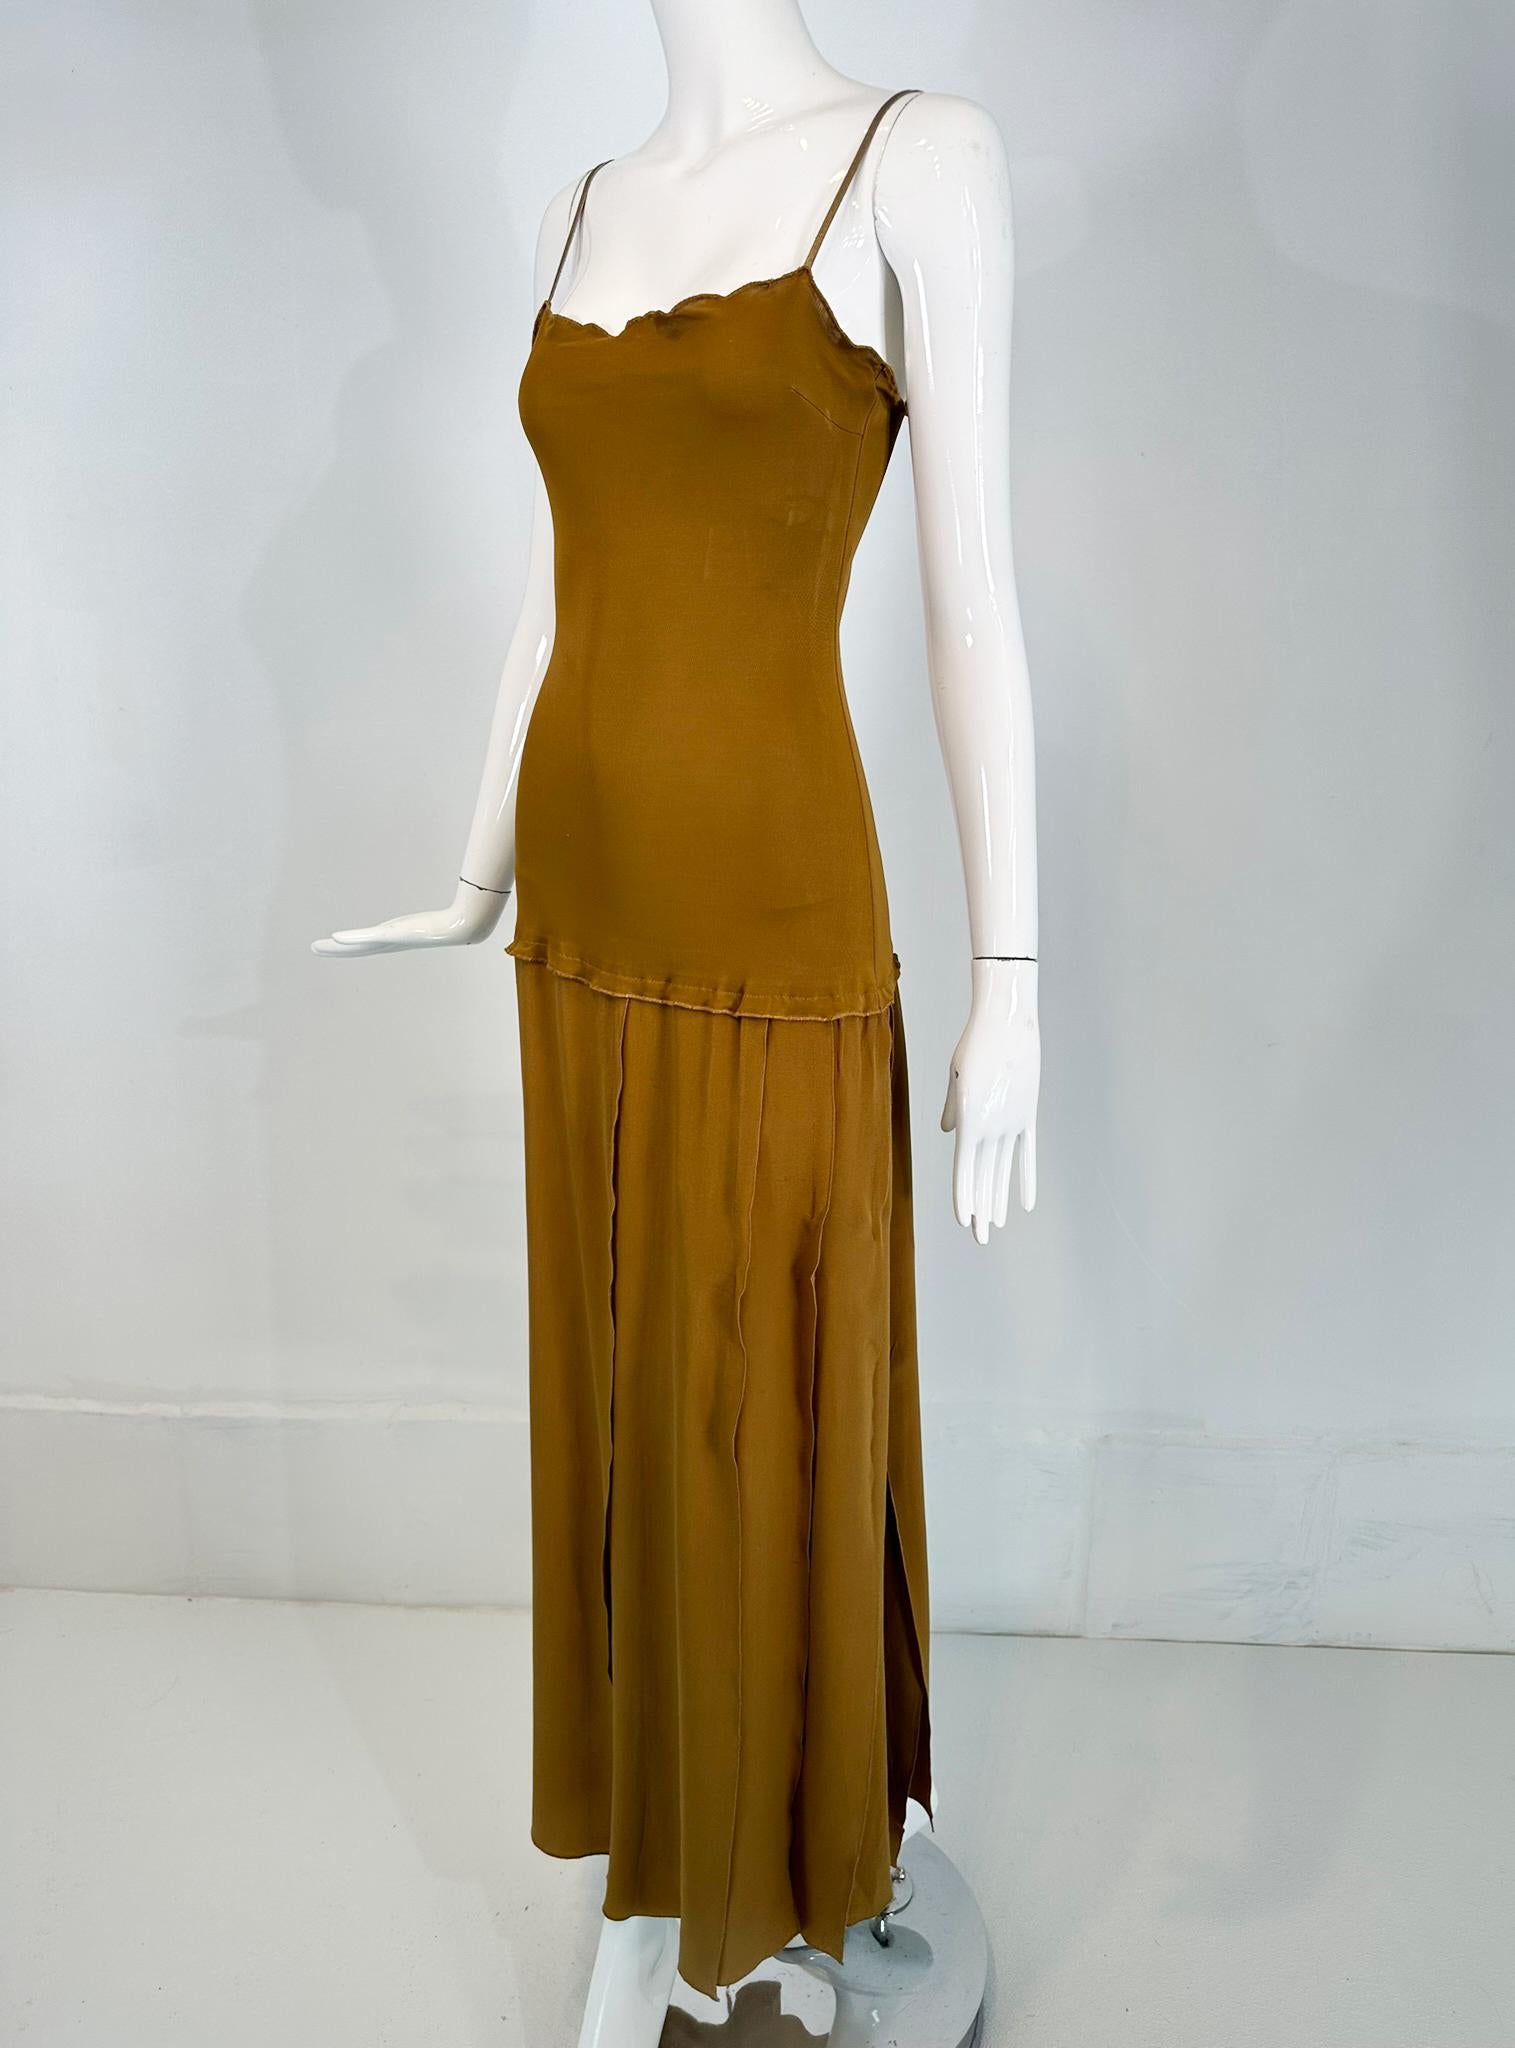 1990s Genny deep rich gold rayon jersey & gold silk chiffon floating panels & narrow gold leather straps, evening dress. This gorgeous dress is simply elegant. Pull on style dress, the slim stretch jersey bodice with over cast stitched finished